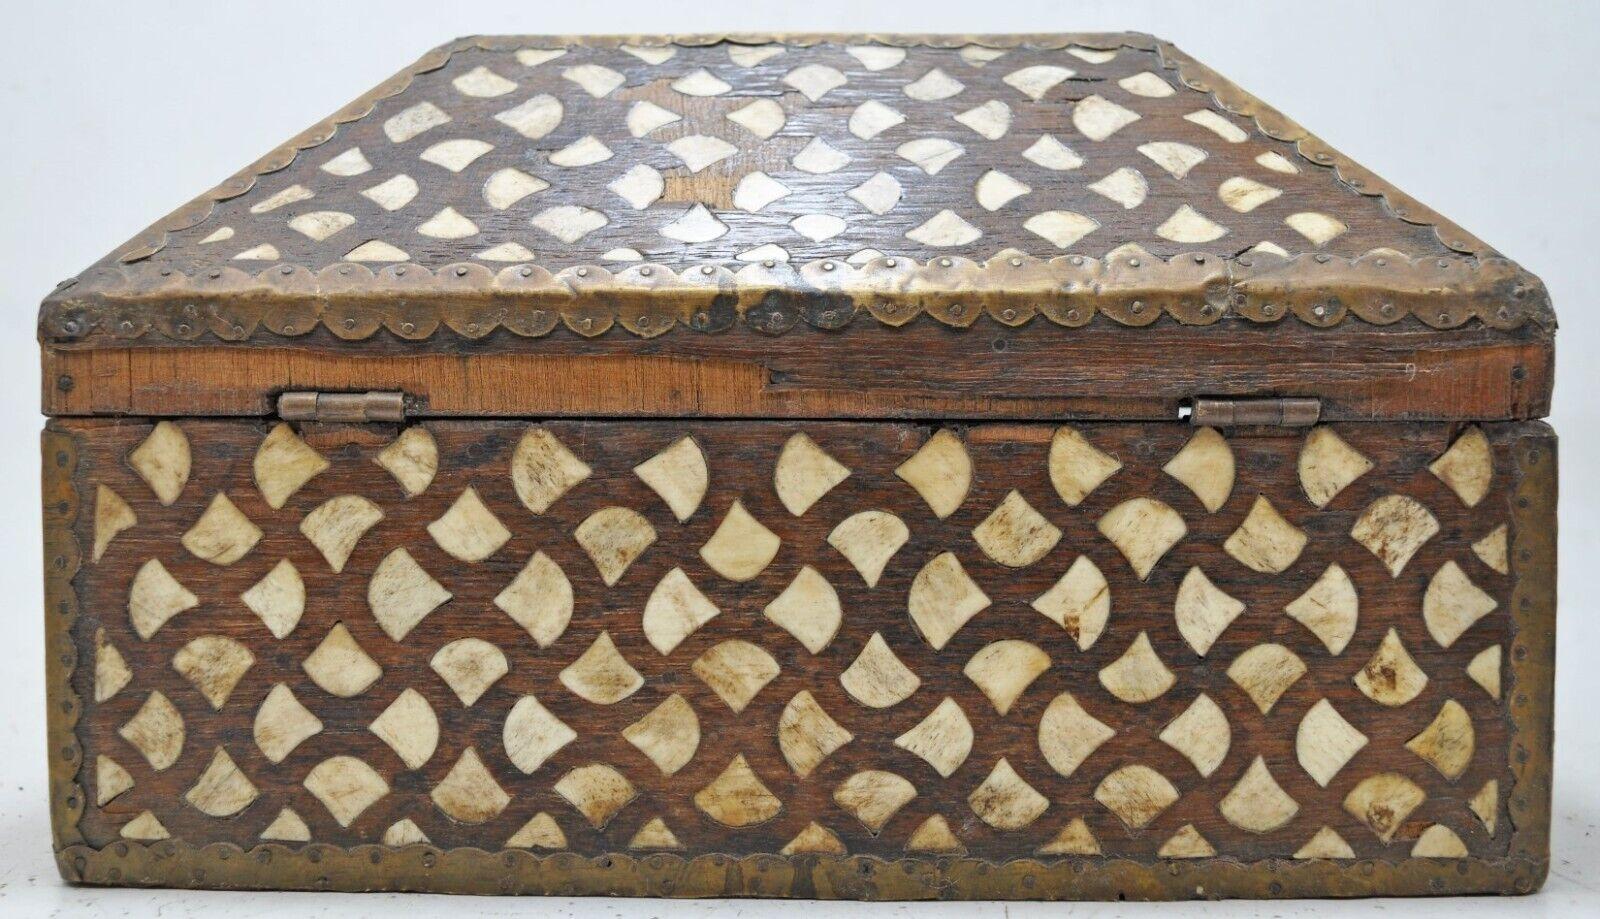 Indian Antique Hand-Crafted Decorative Box with Distinctive Bone Inlay Pattern  For Sale